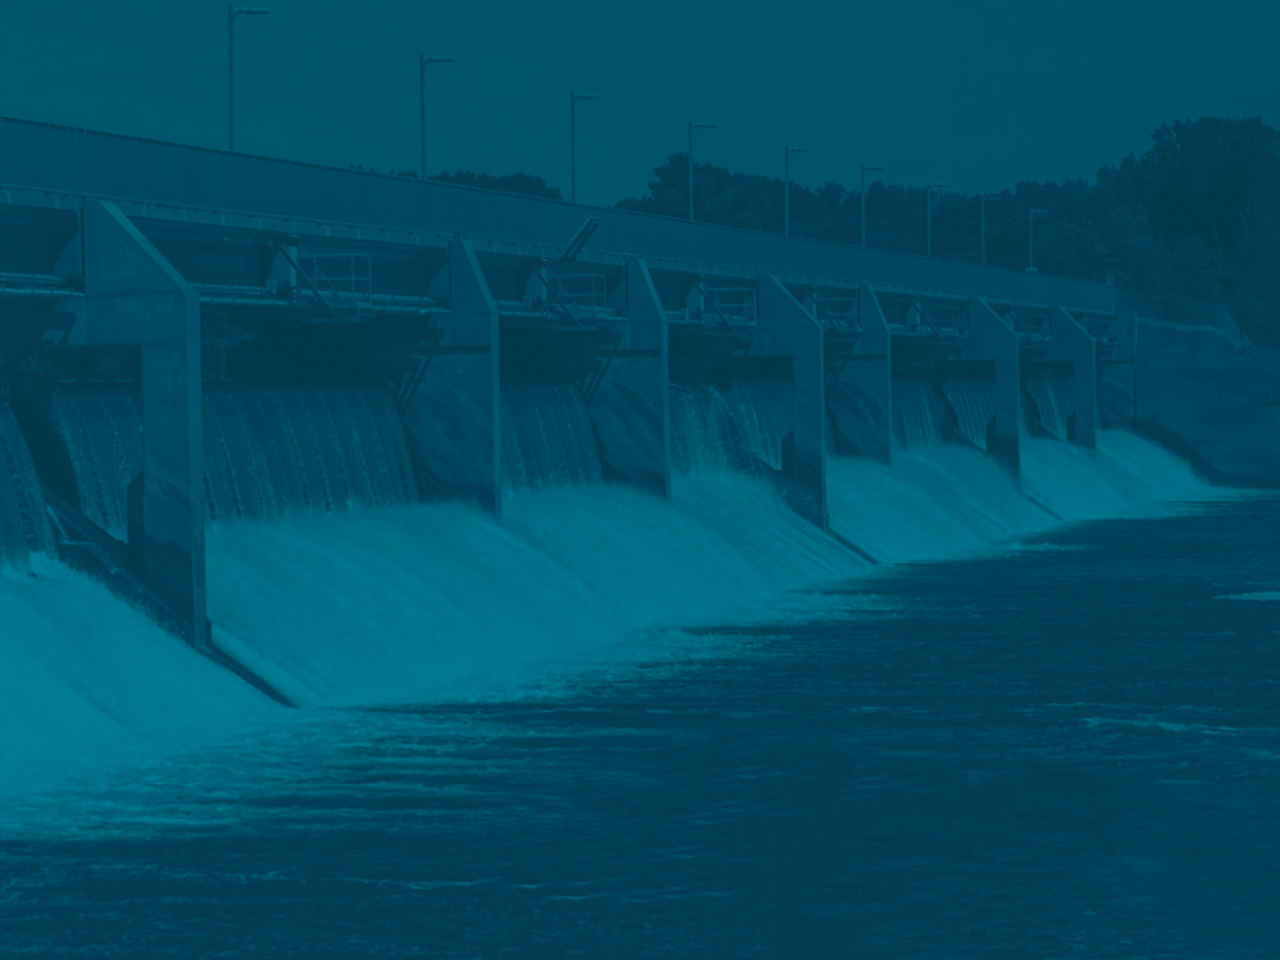 Securing critical infrastructure webinar featured image of a water dam